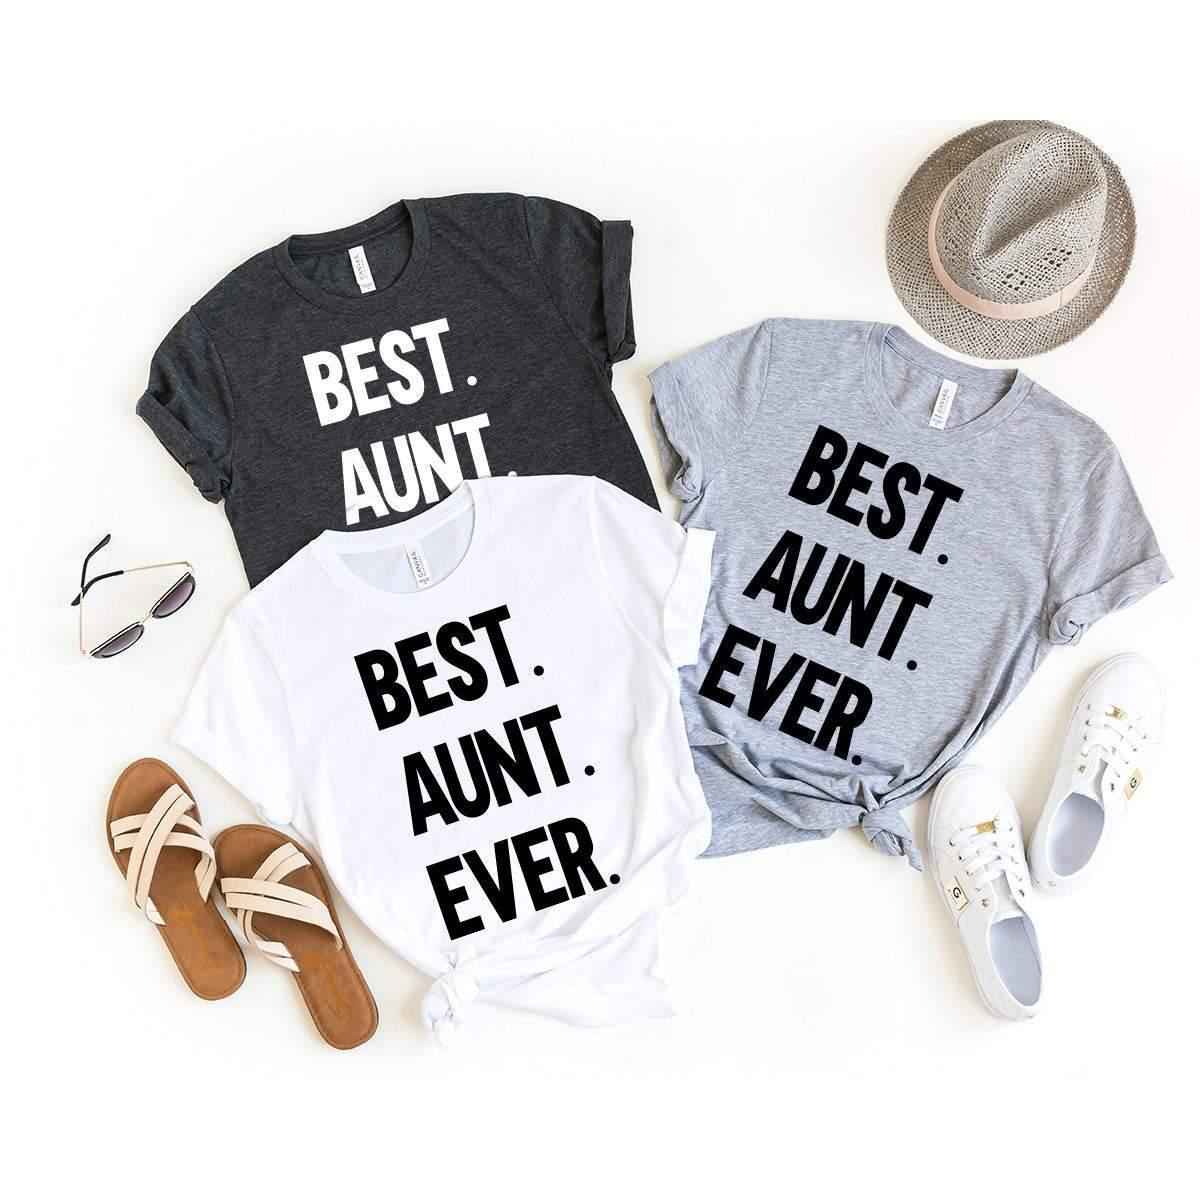 Best Aunt Ever T Shirt, Best Aunt Gift, World's Best  Aunt, Cool Aunt Shirt, New Aunt Shirt, Auntie Shirt, Shirt For Aunts, Aunt Graphic Tee - Fastdeliverytees.com